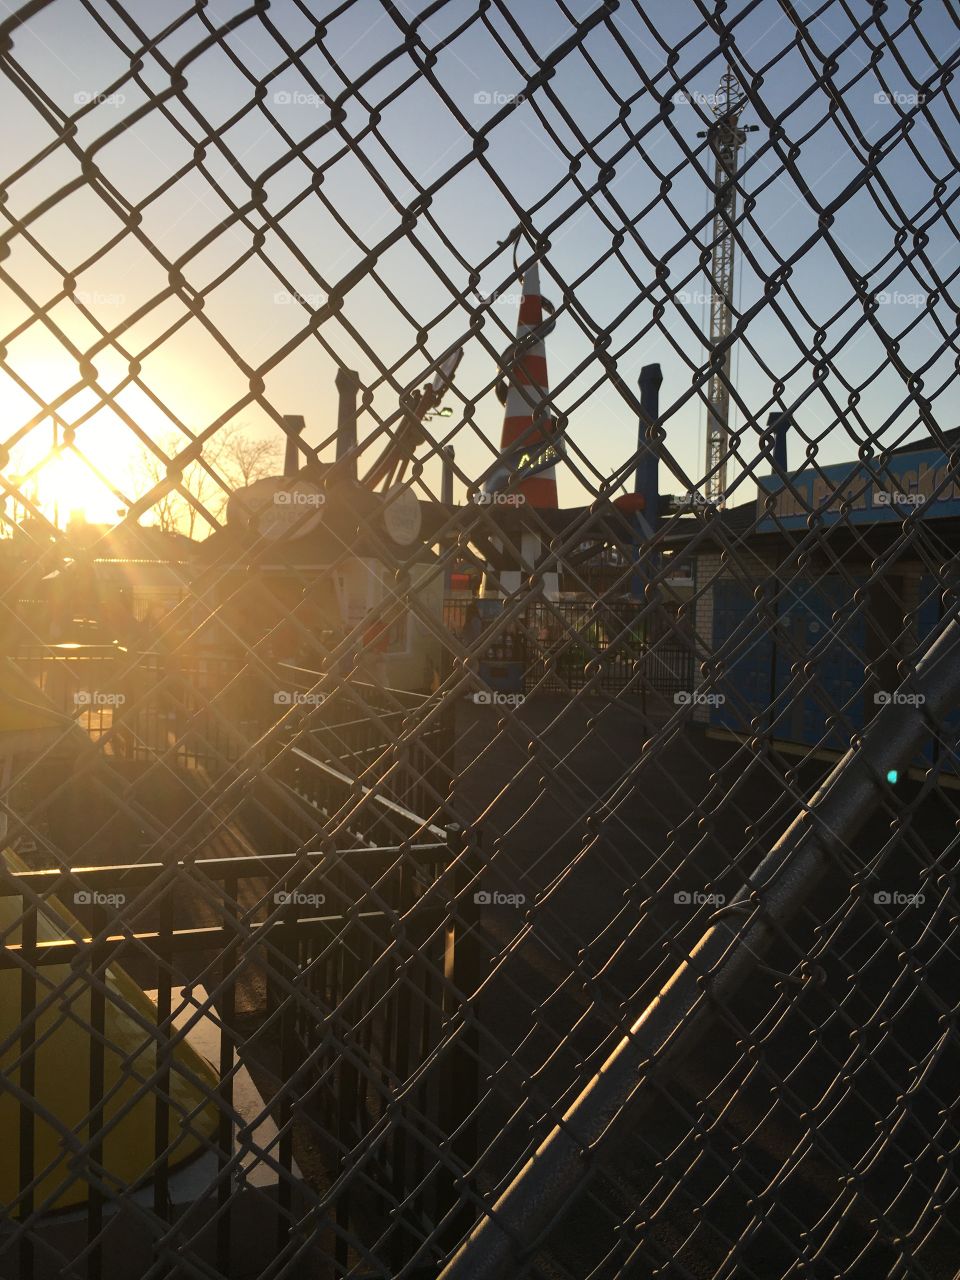 Sunset Through the Fence